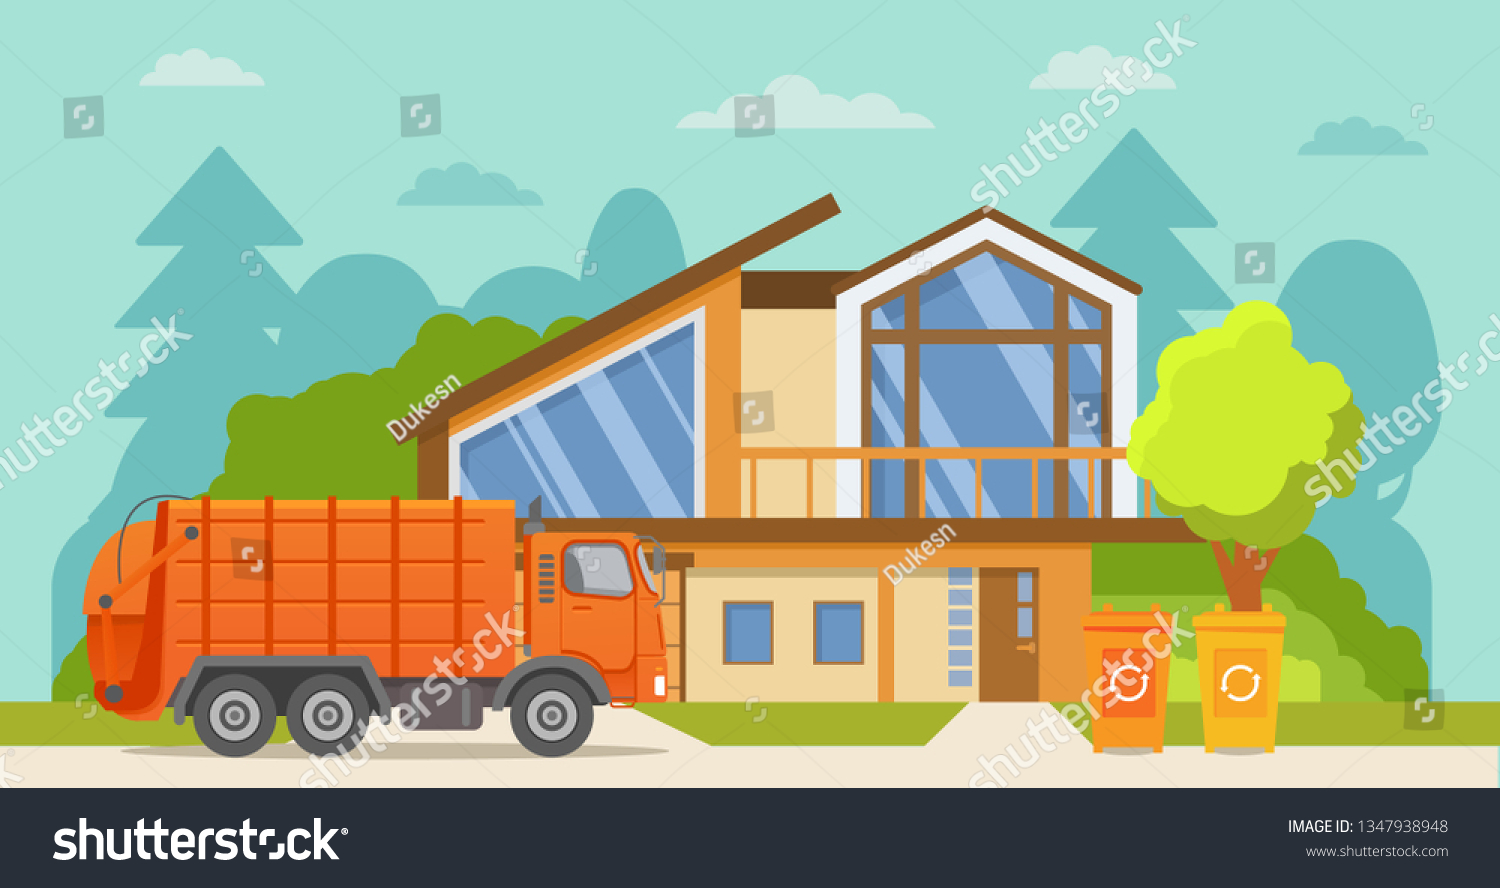 SVG of Garbage truck.Urban sanitary loader truck.City service.Vector illustration.House exterior.Home front view facade with roof. Townhouse building.Garbage cans recycling. svg